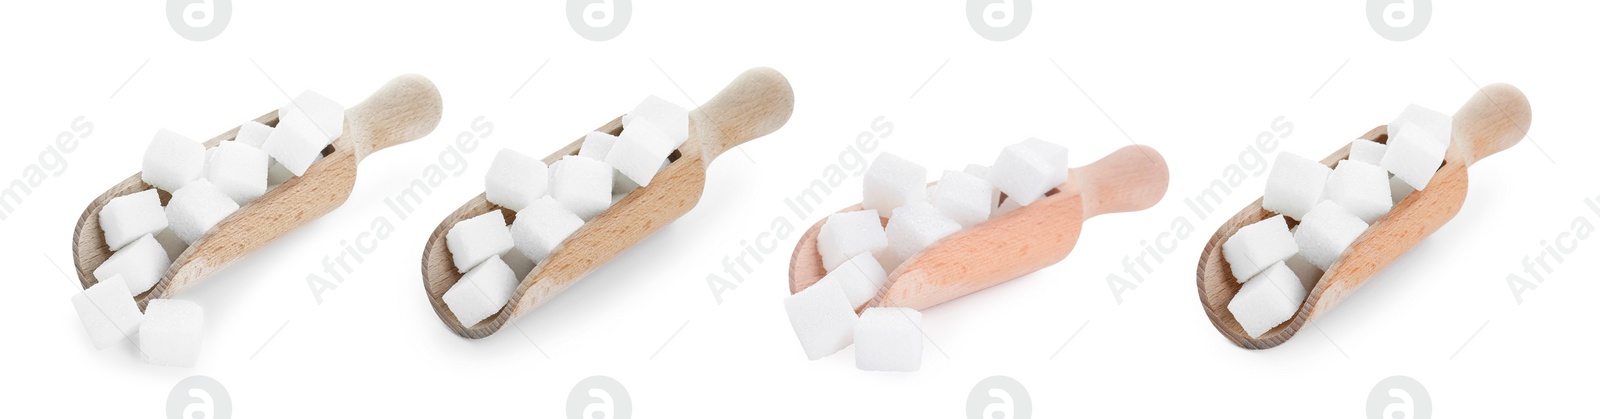 Image of Sugar cubes in scoops isolated on white, set